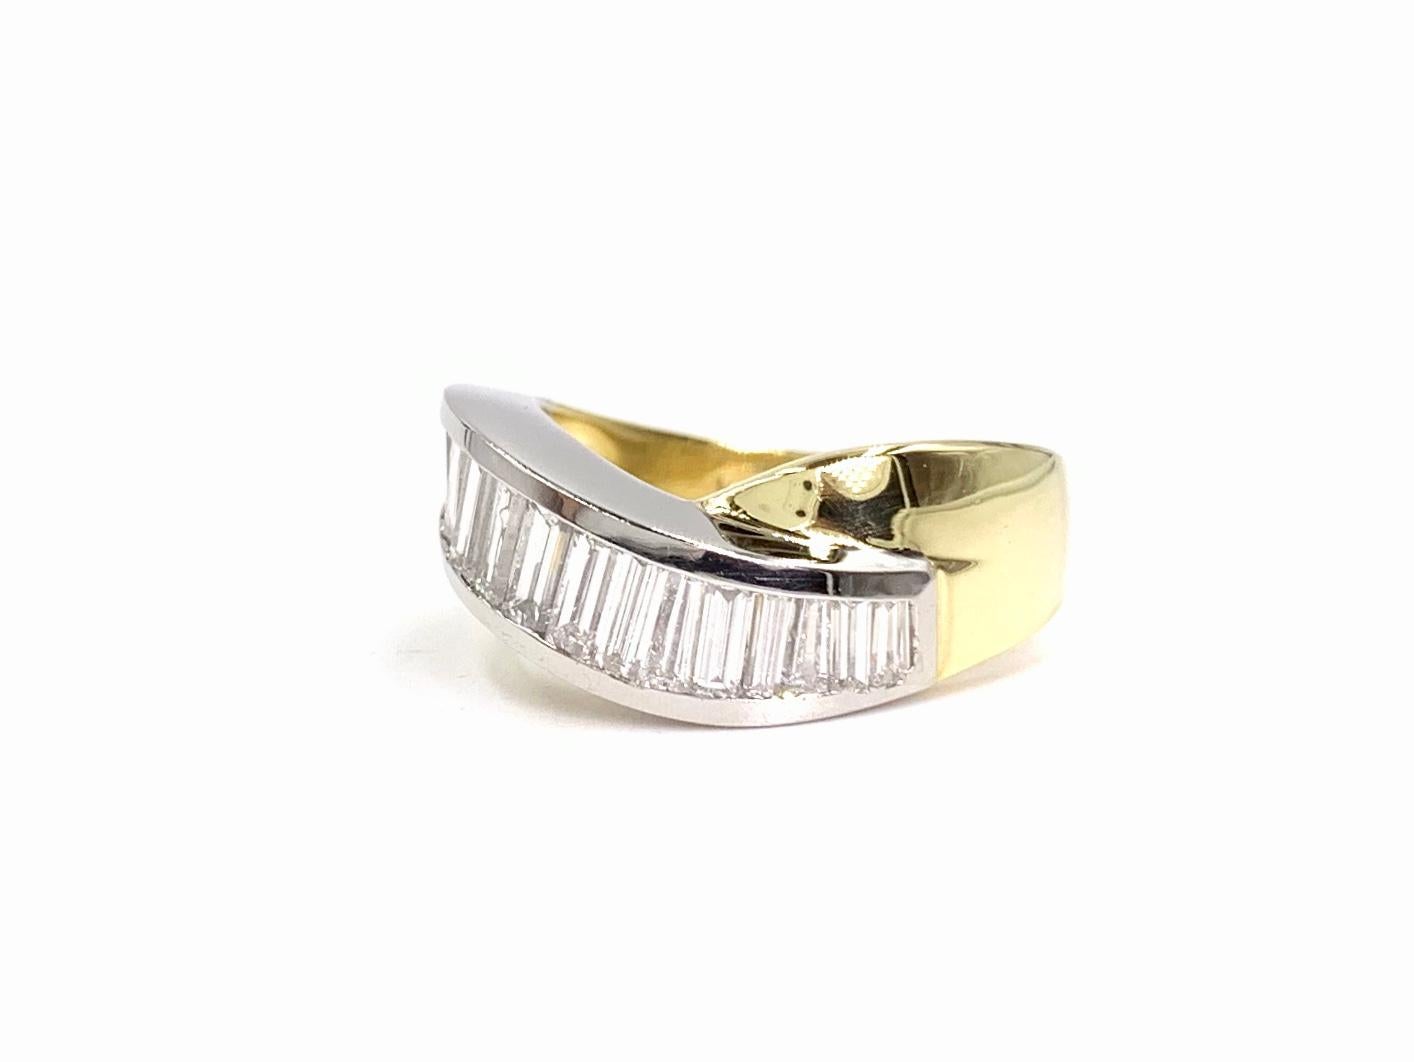 A modern, sleek and wearable curved cross-over design platinum and 18 karat yellow gold ring featuring 1.59 carats of beautiful bright baguette diamonds. Diamonds are approximately G color, VS2 clarity and are expertly channel set in the platinum